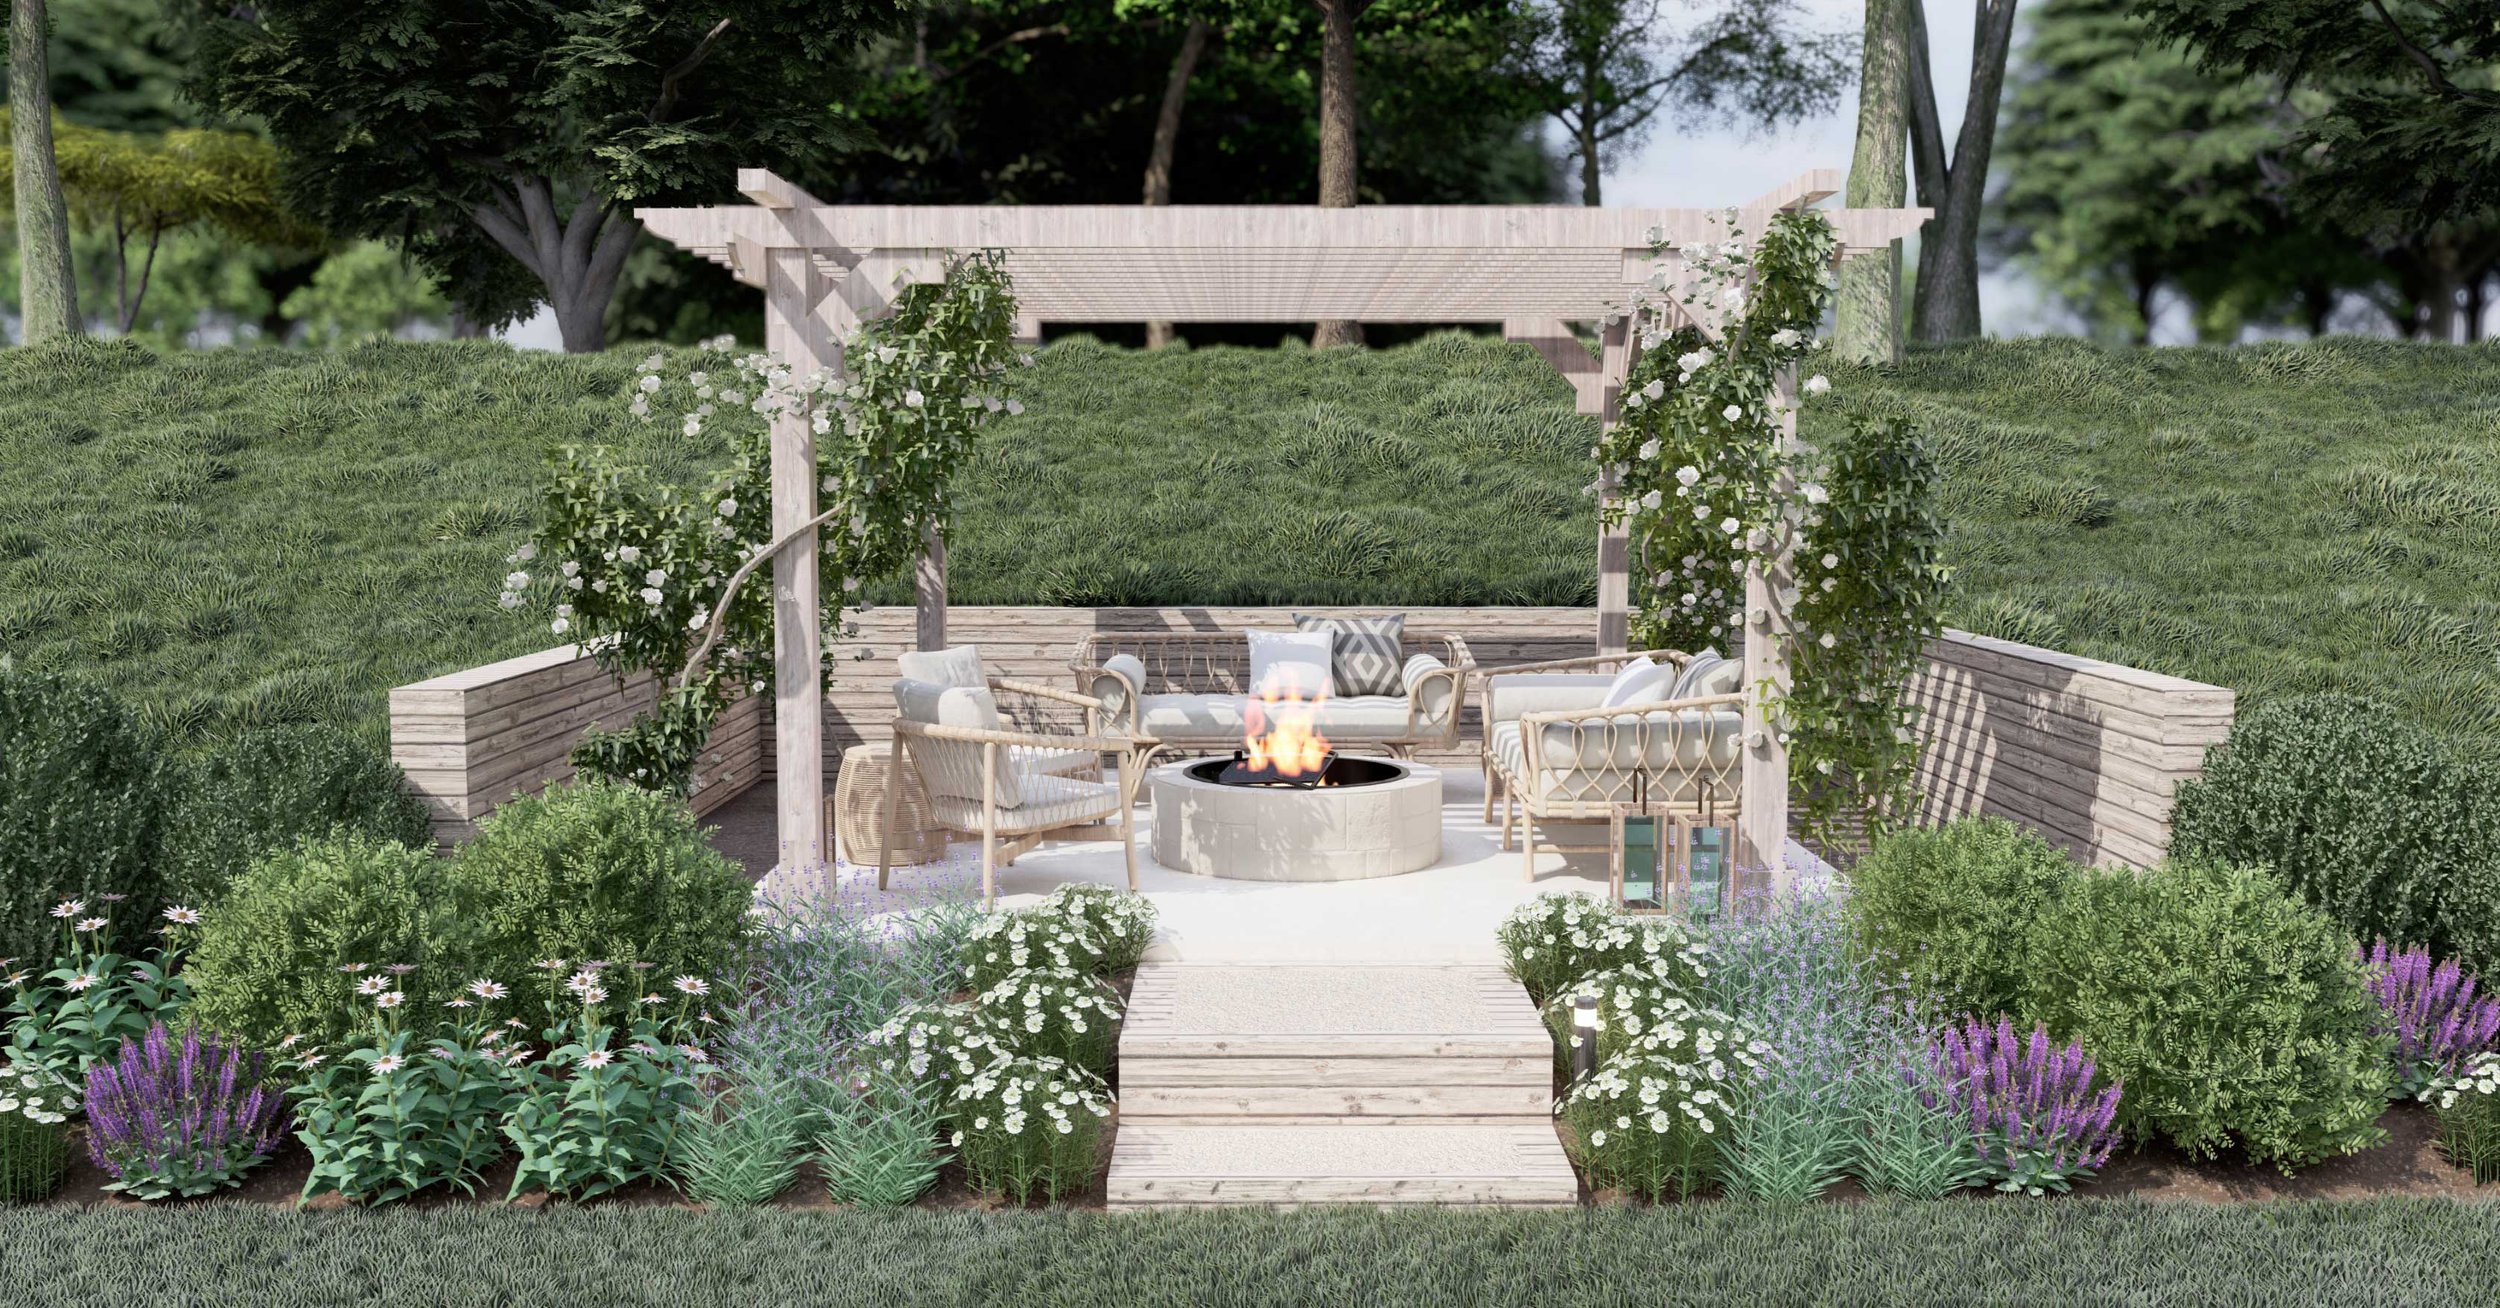 Pergola covered in white creeping roses creates a cozy and beautiful outdoor fire pit area in Oklahoma back yard design